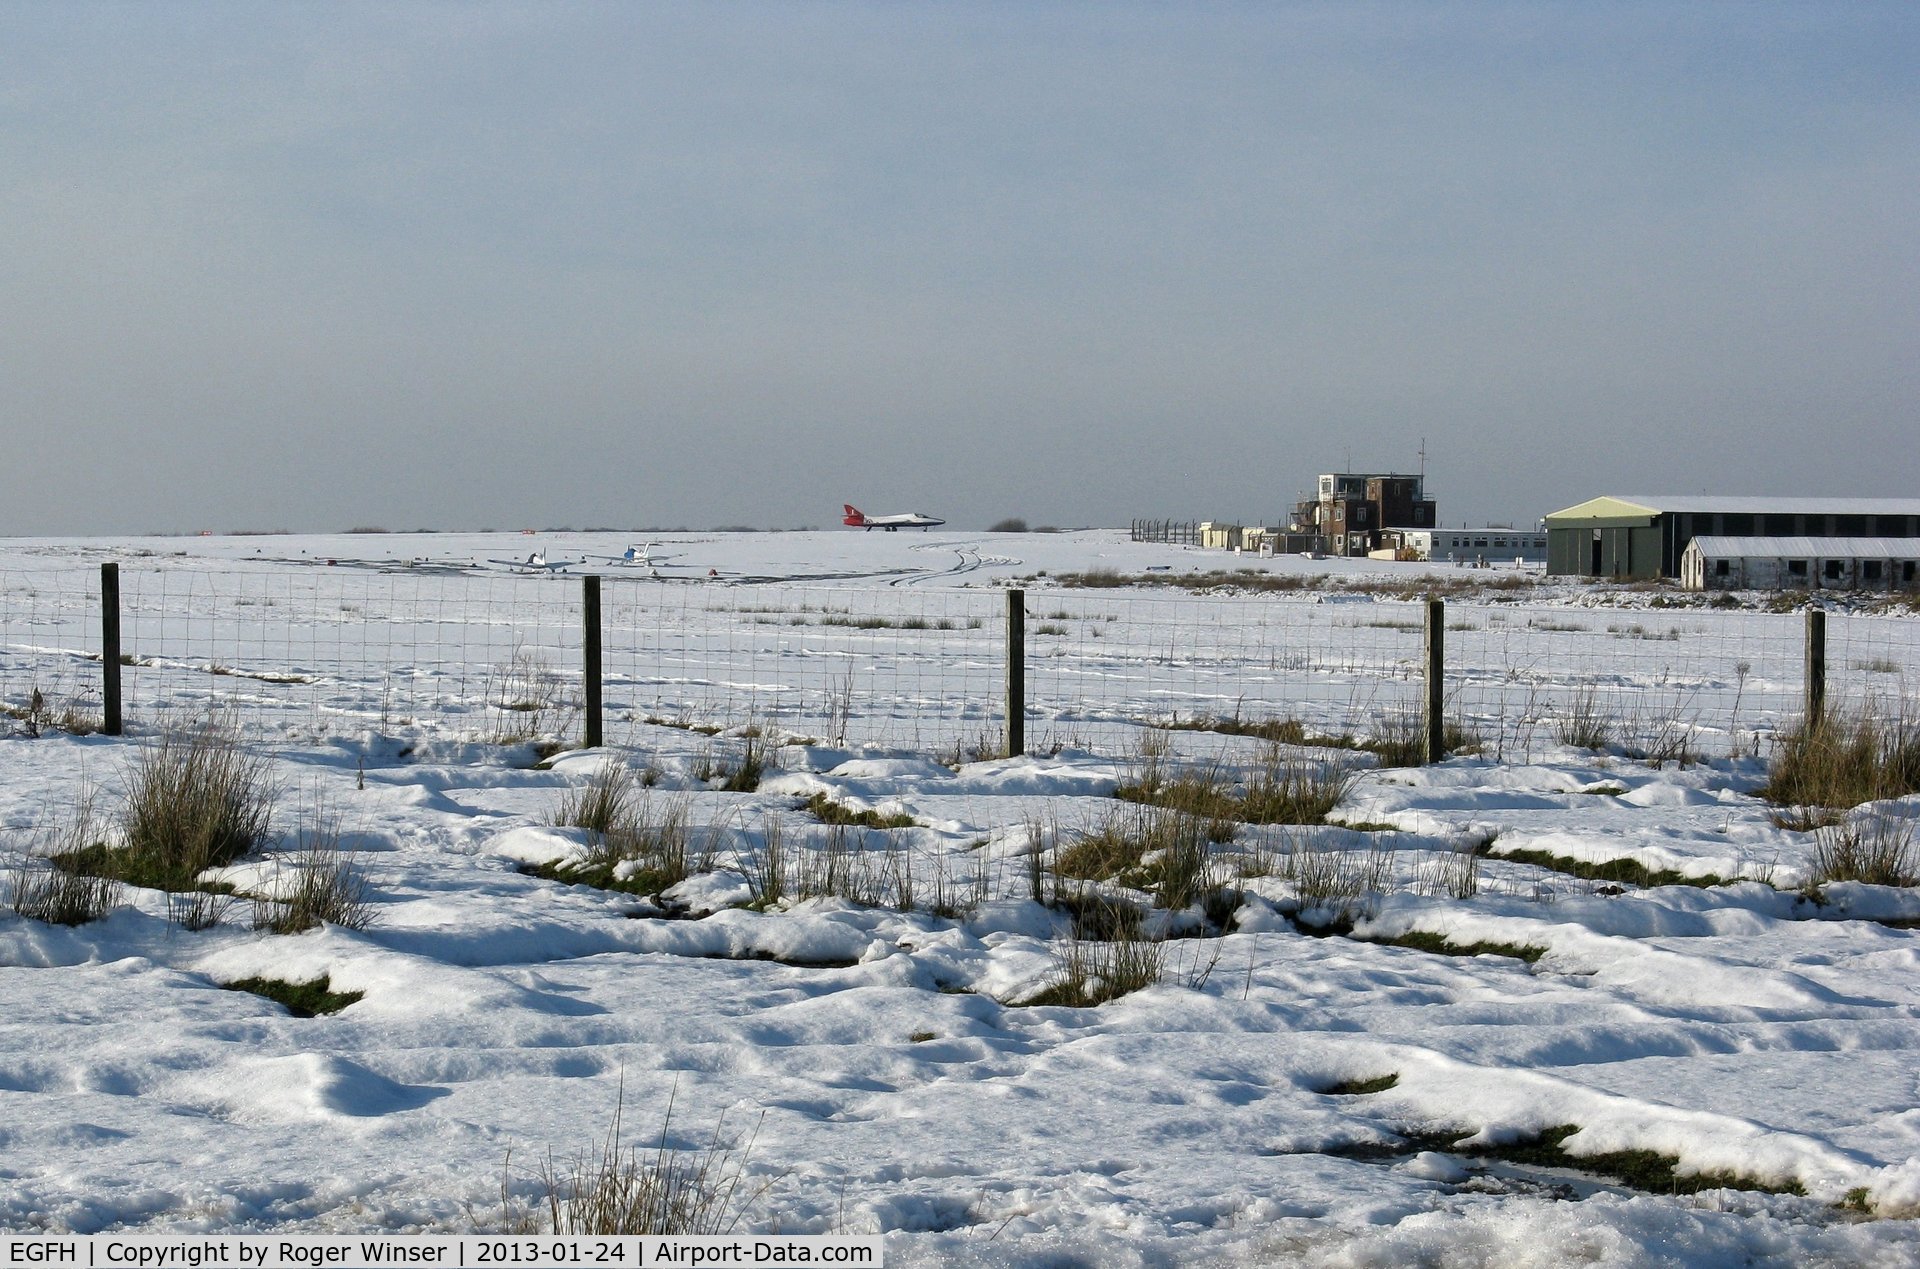 Swansea Airport, Swansea, Wales United Kingdom (EGFH) - No flying today!